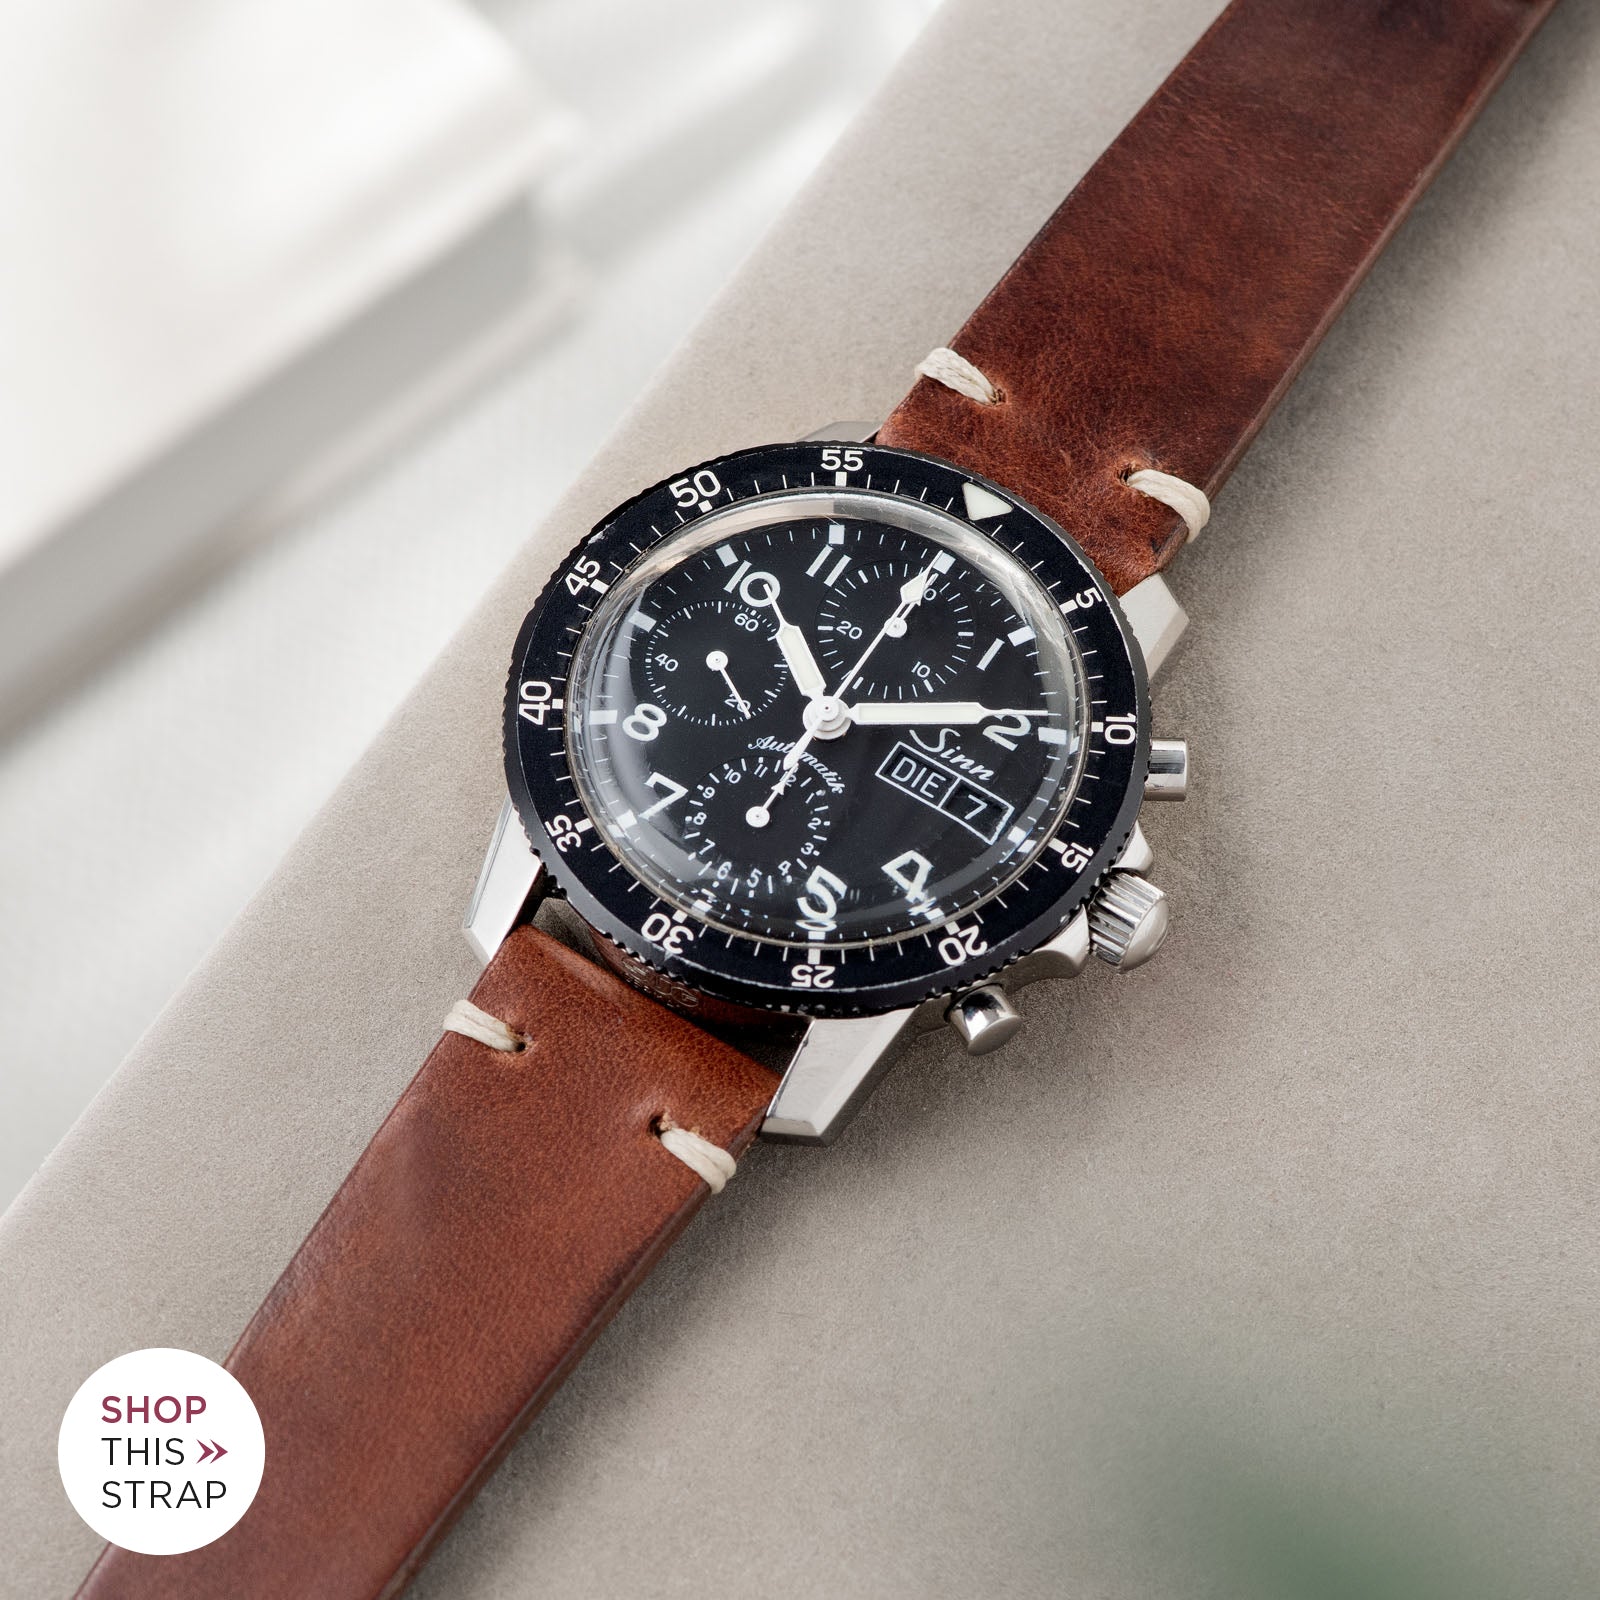 Bulang and Sons_Strap Guide_Sinn 103St Flieder Chronograph_Siena Brown Leather Watch Strap